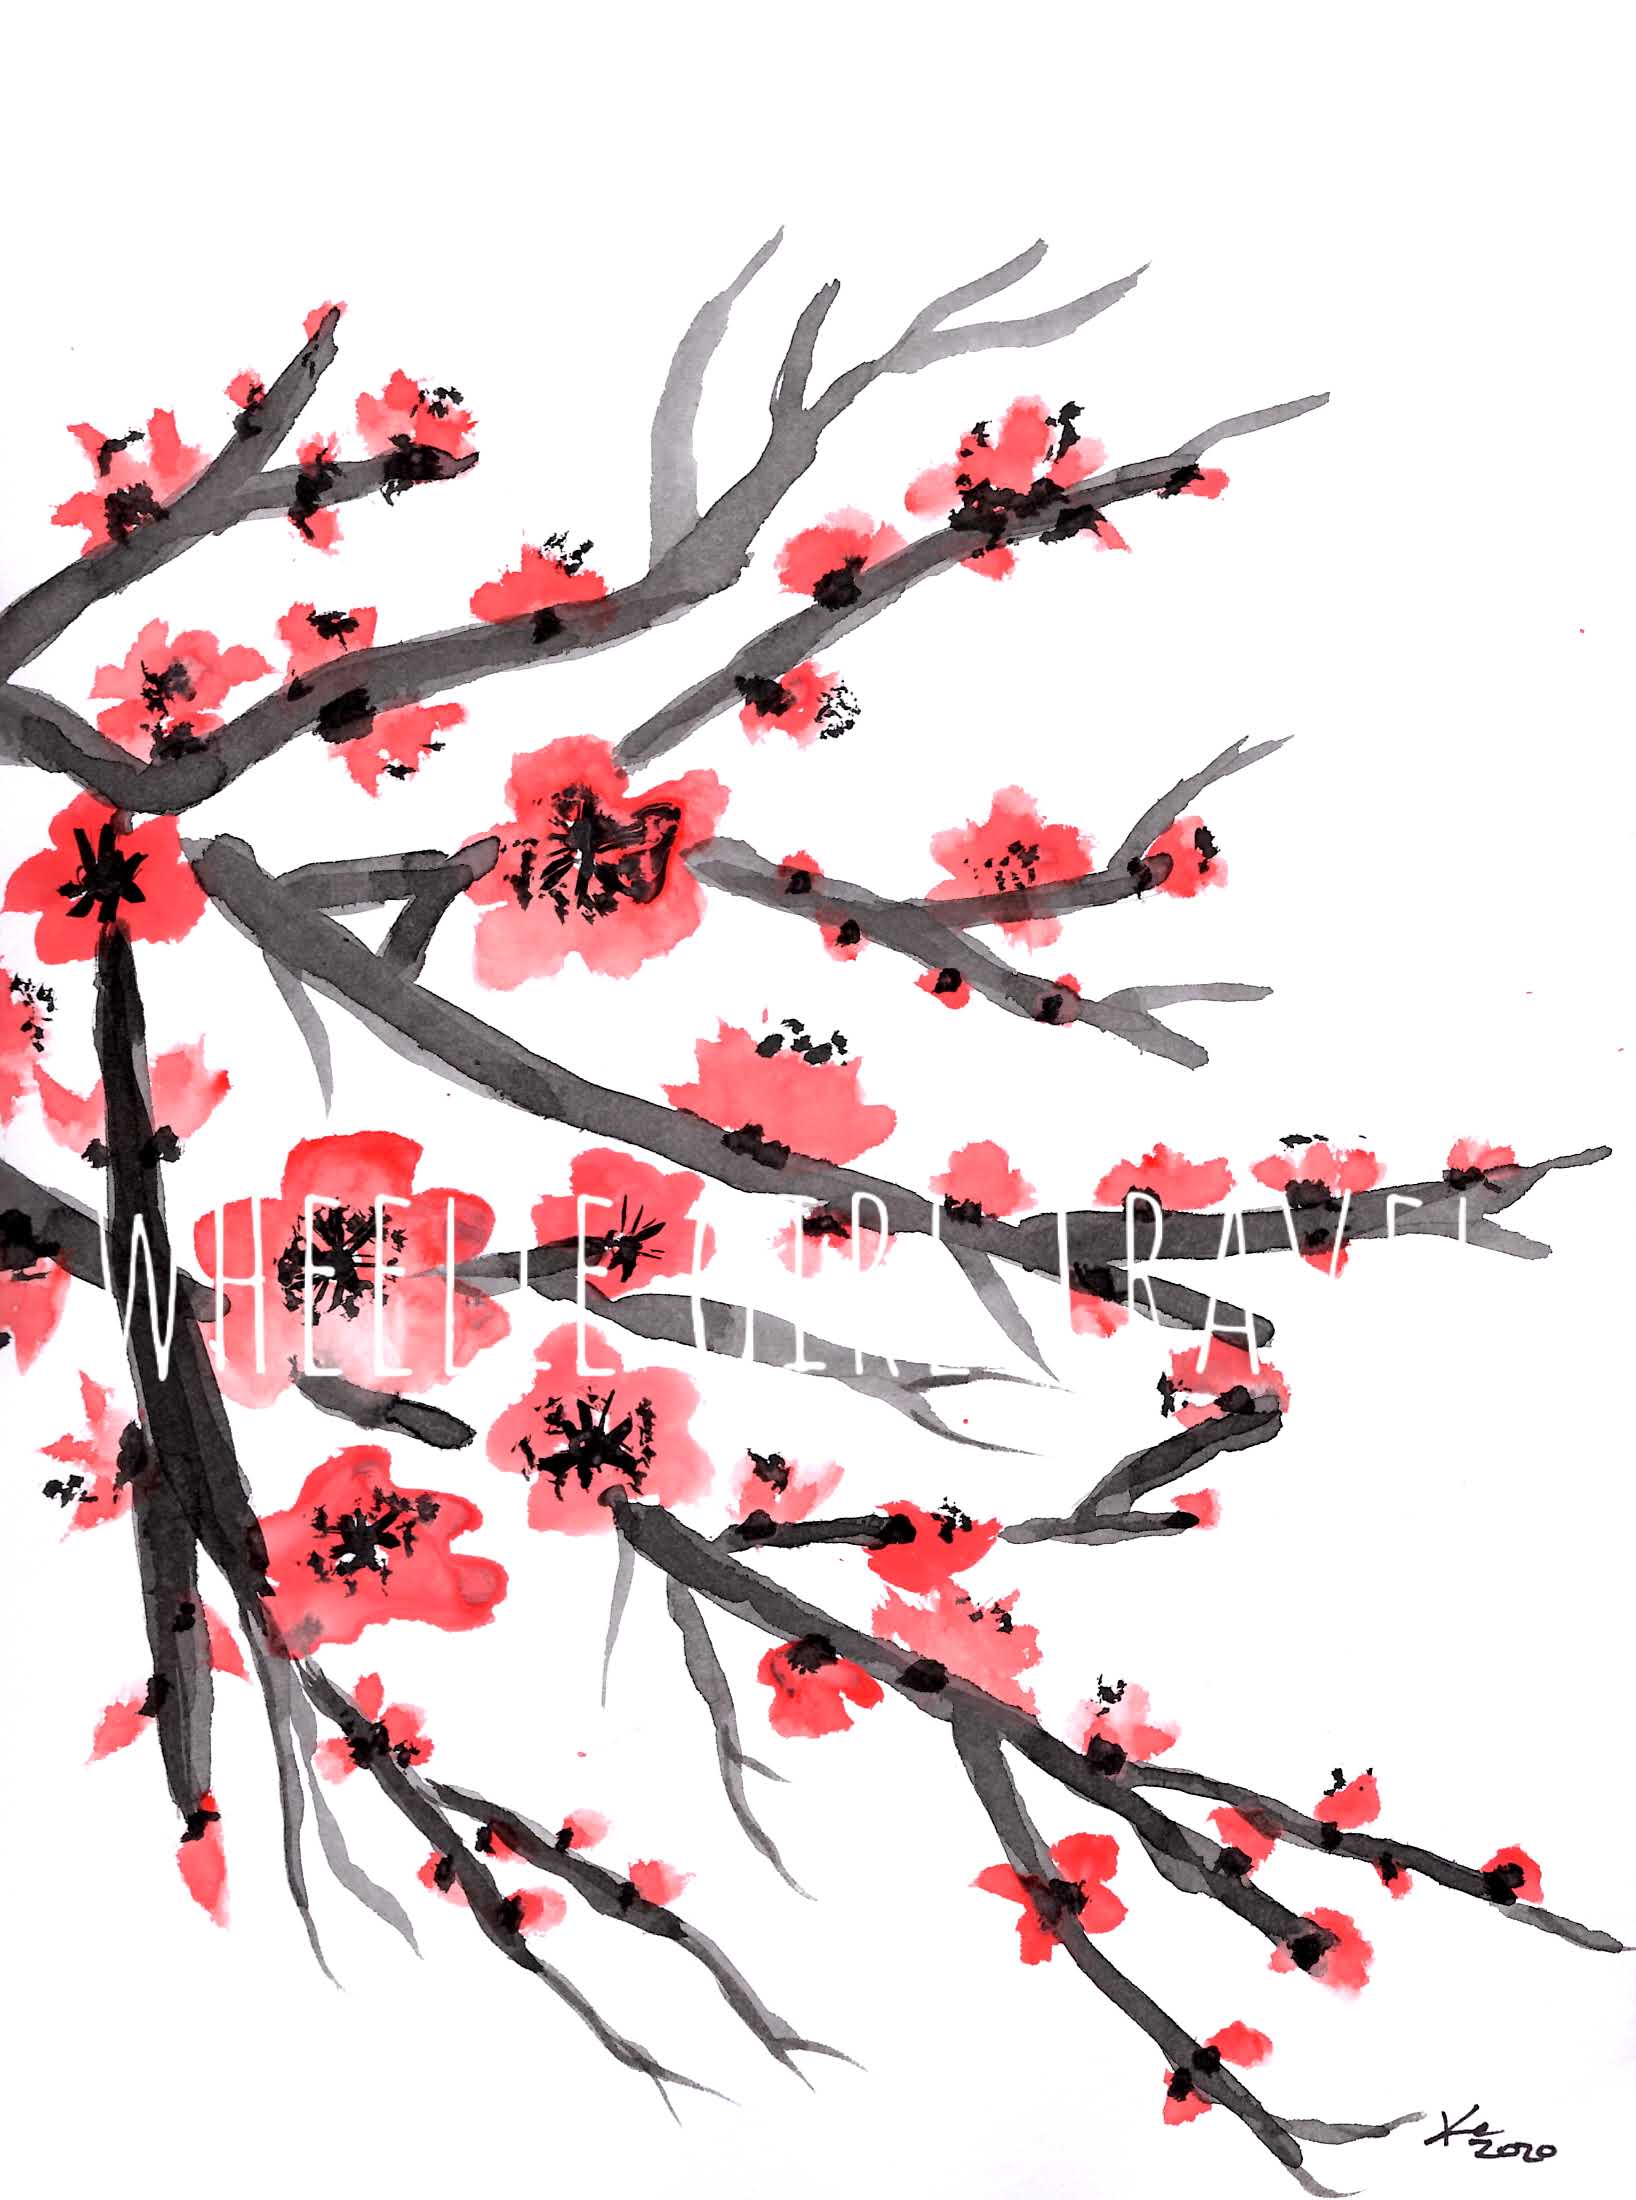 Red plum blossoms with black centers and small red buds are seen on black and grey branches.